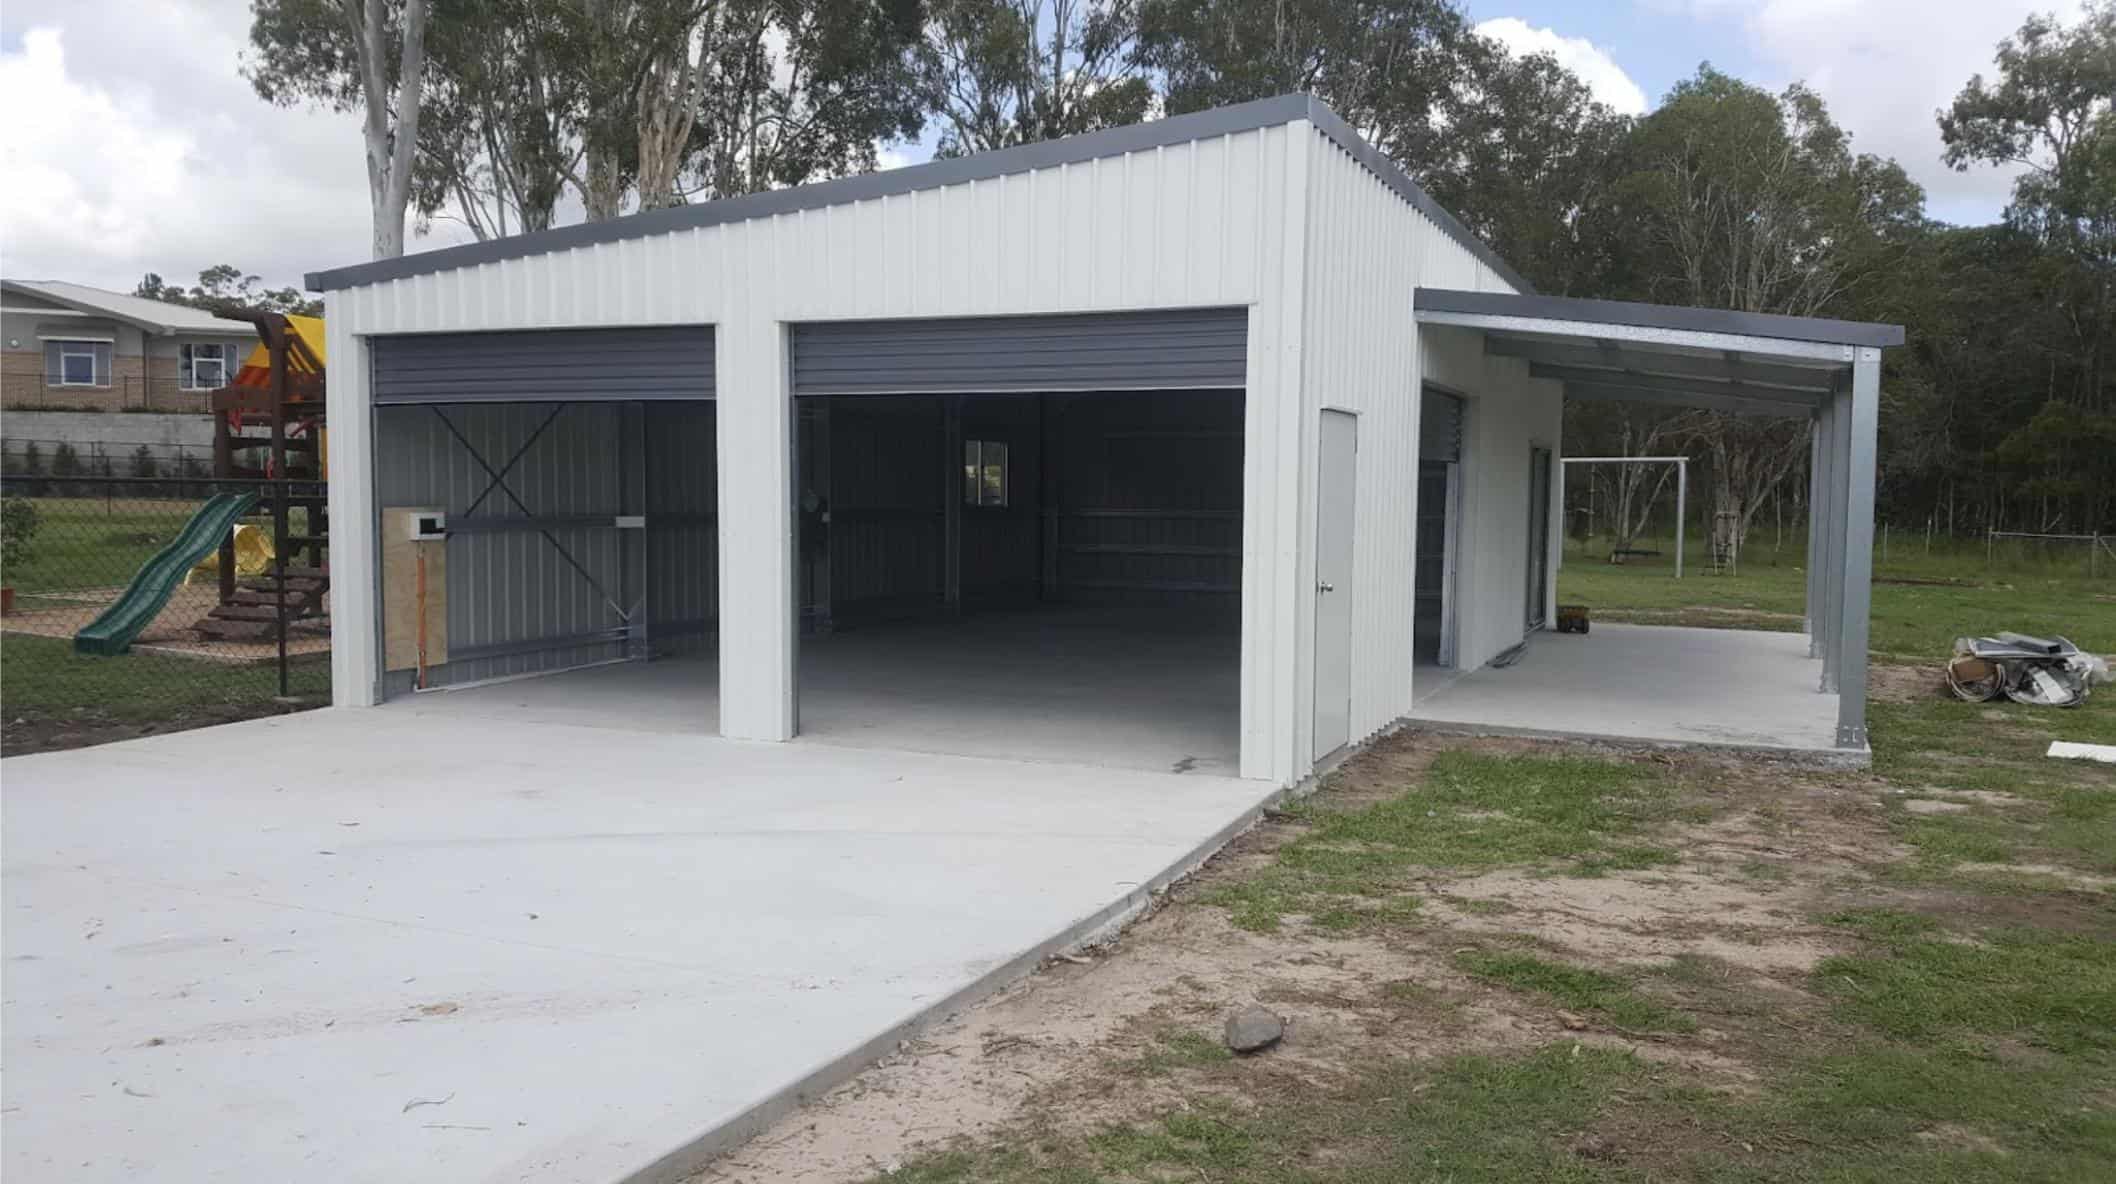 Metal shed with a double garage and carport layout.